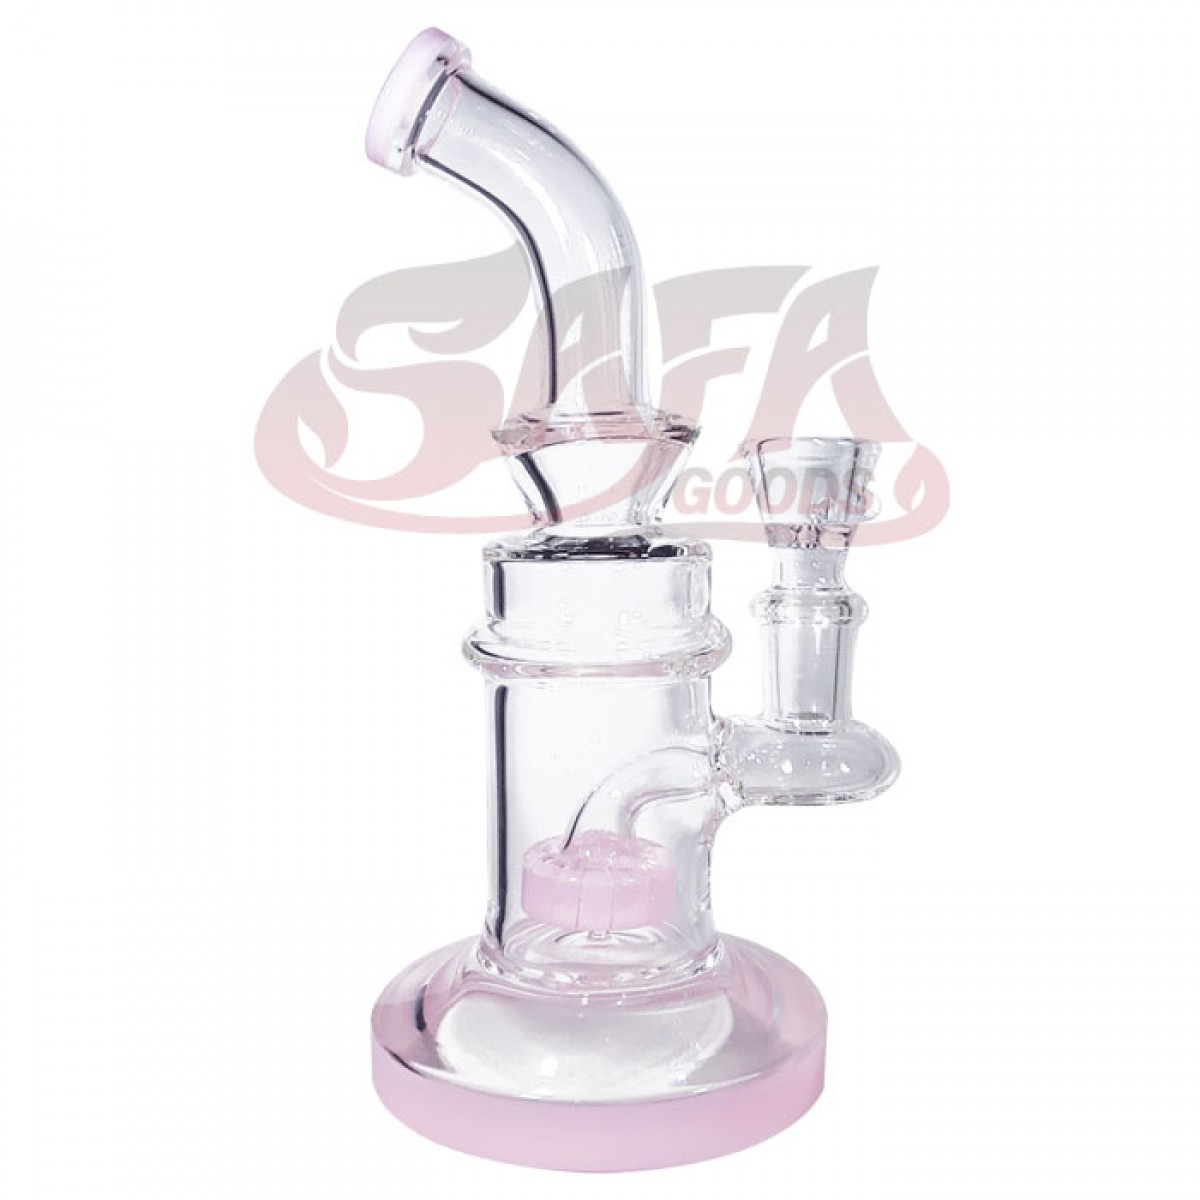 7 Inch Banger Hanger Water Pipes - Clear w/ Showerhead Perc